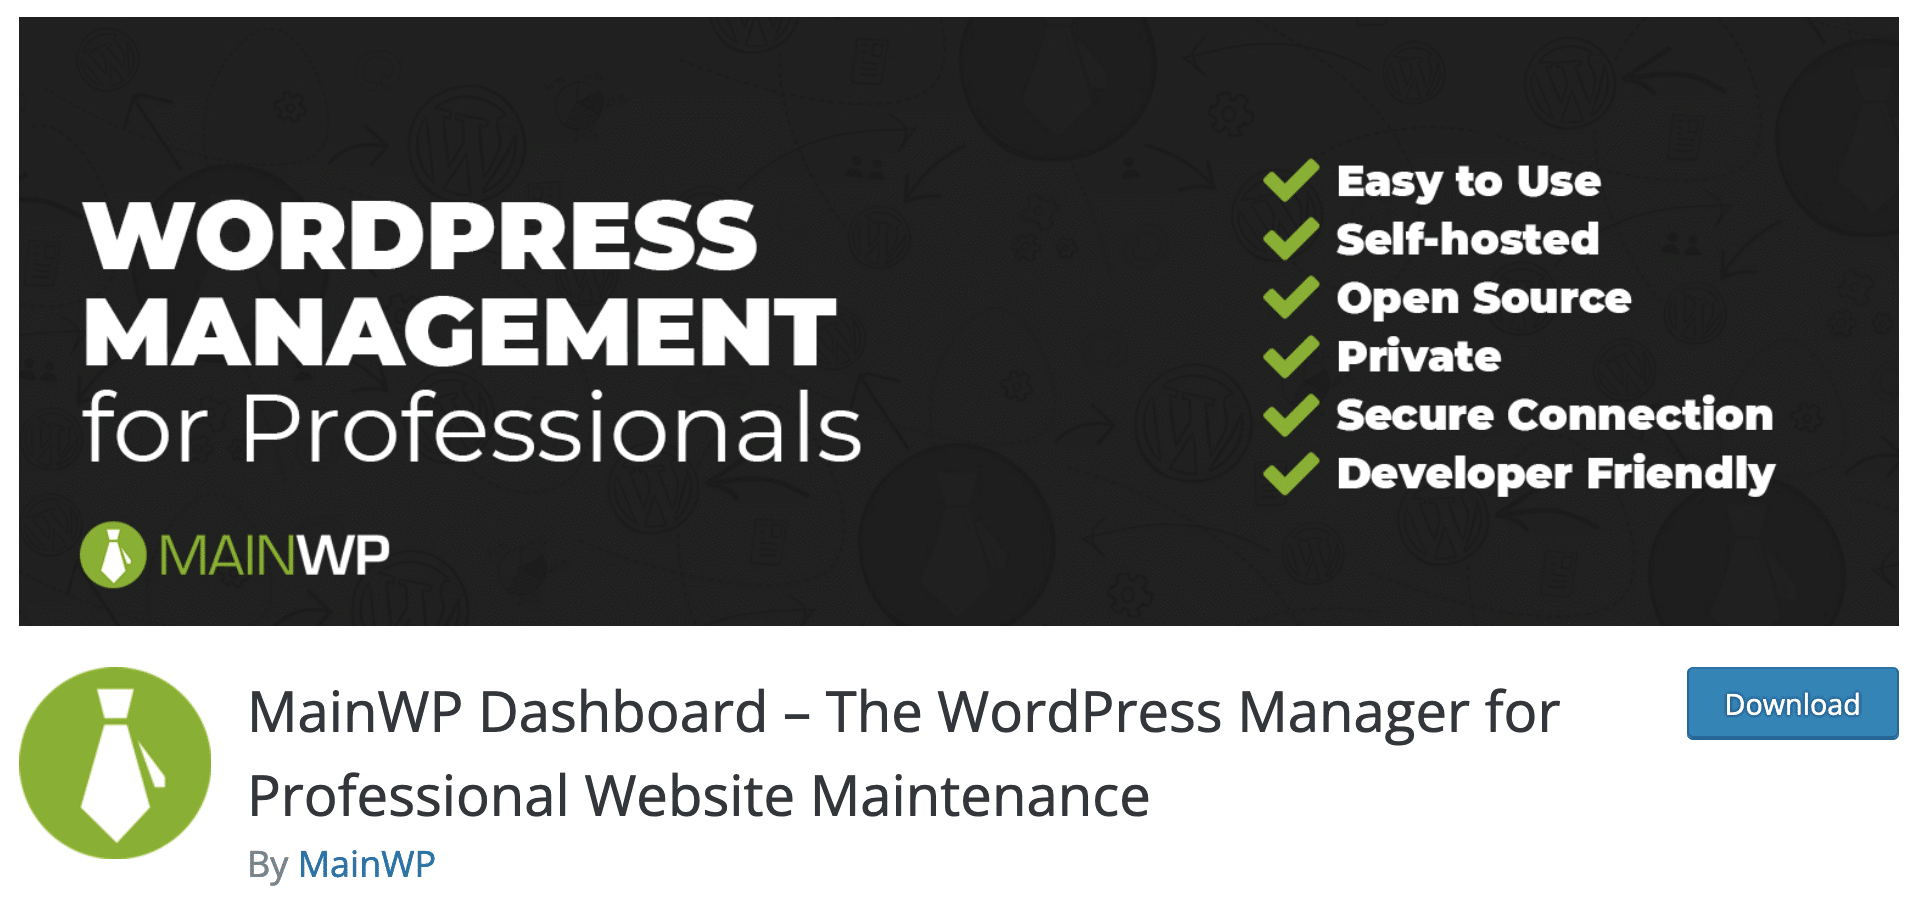 MainWP is a plugin allowing you to manage all your WordPress sites from a single dashboard. 